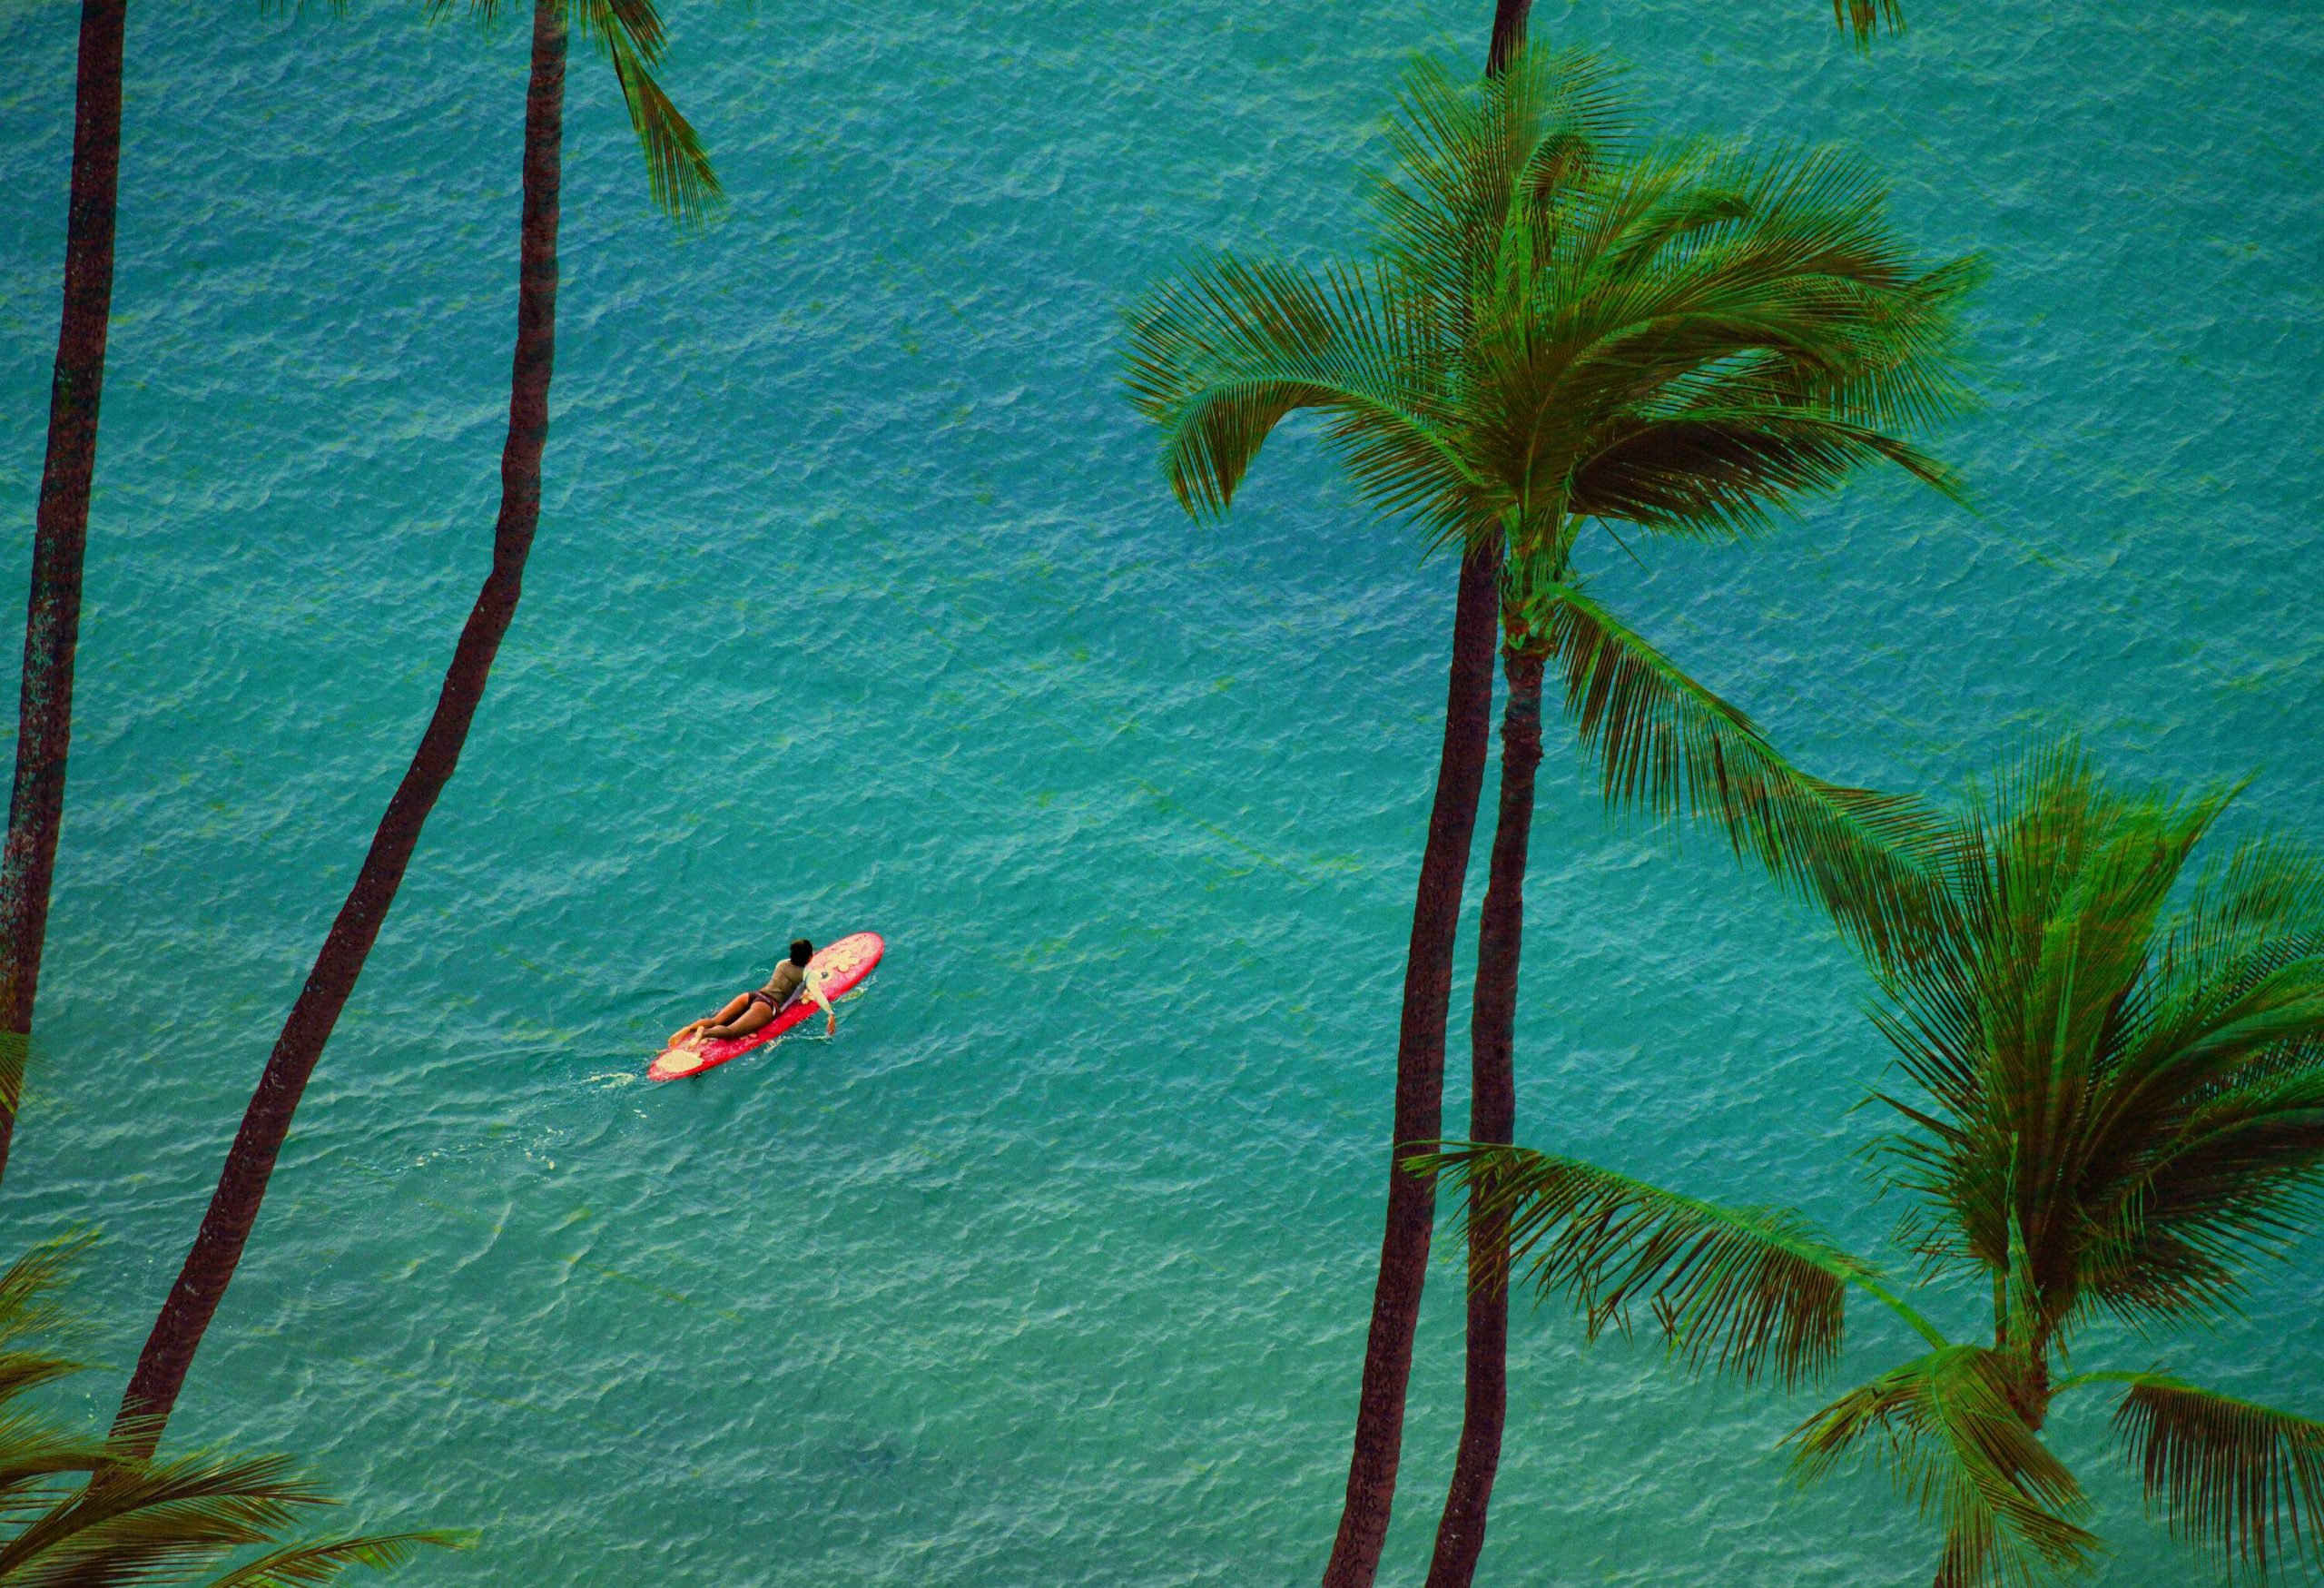 A grove of palm trees against the backdrop of a woman paddling across a turquoise ocean with a surfboard.